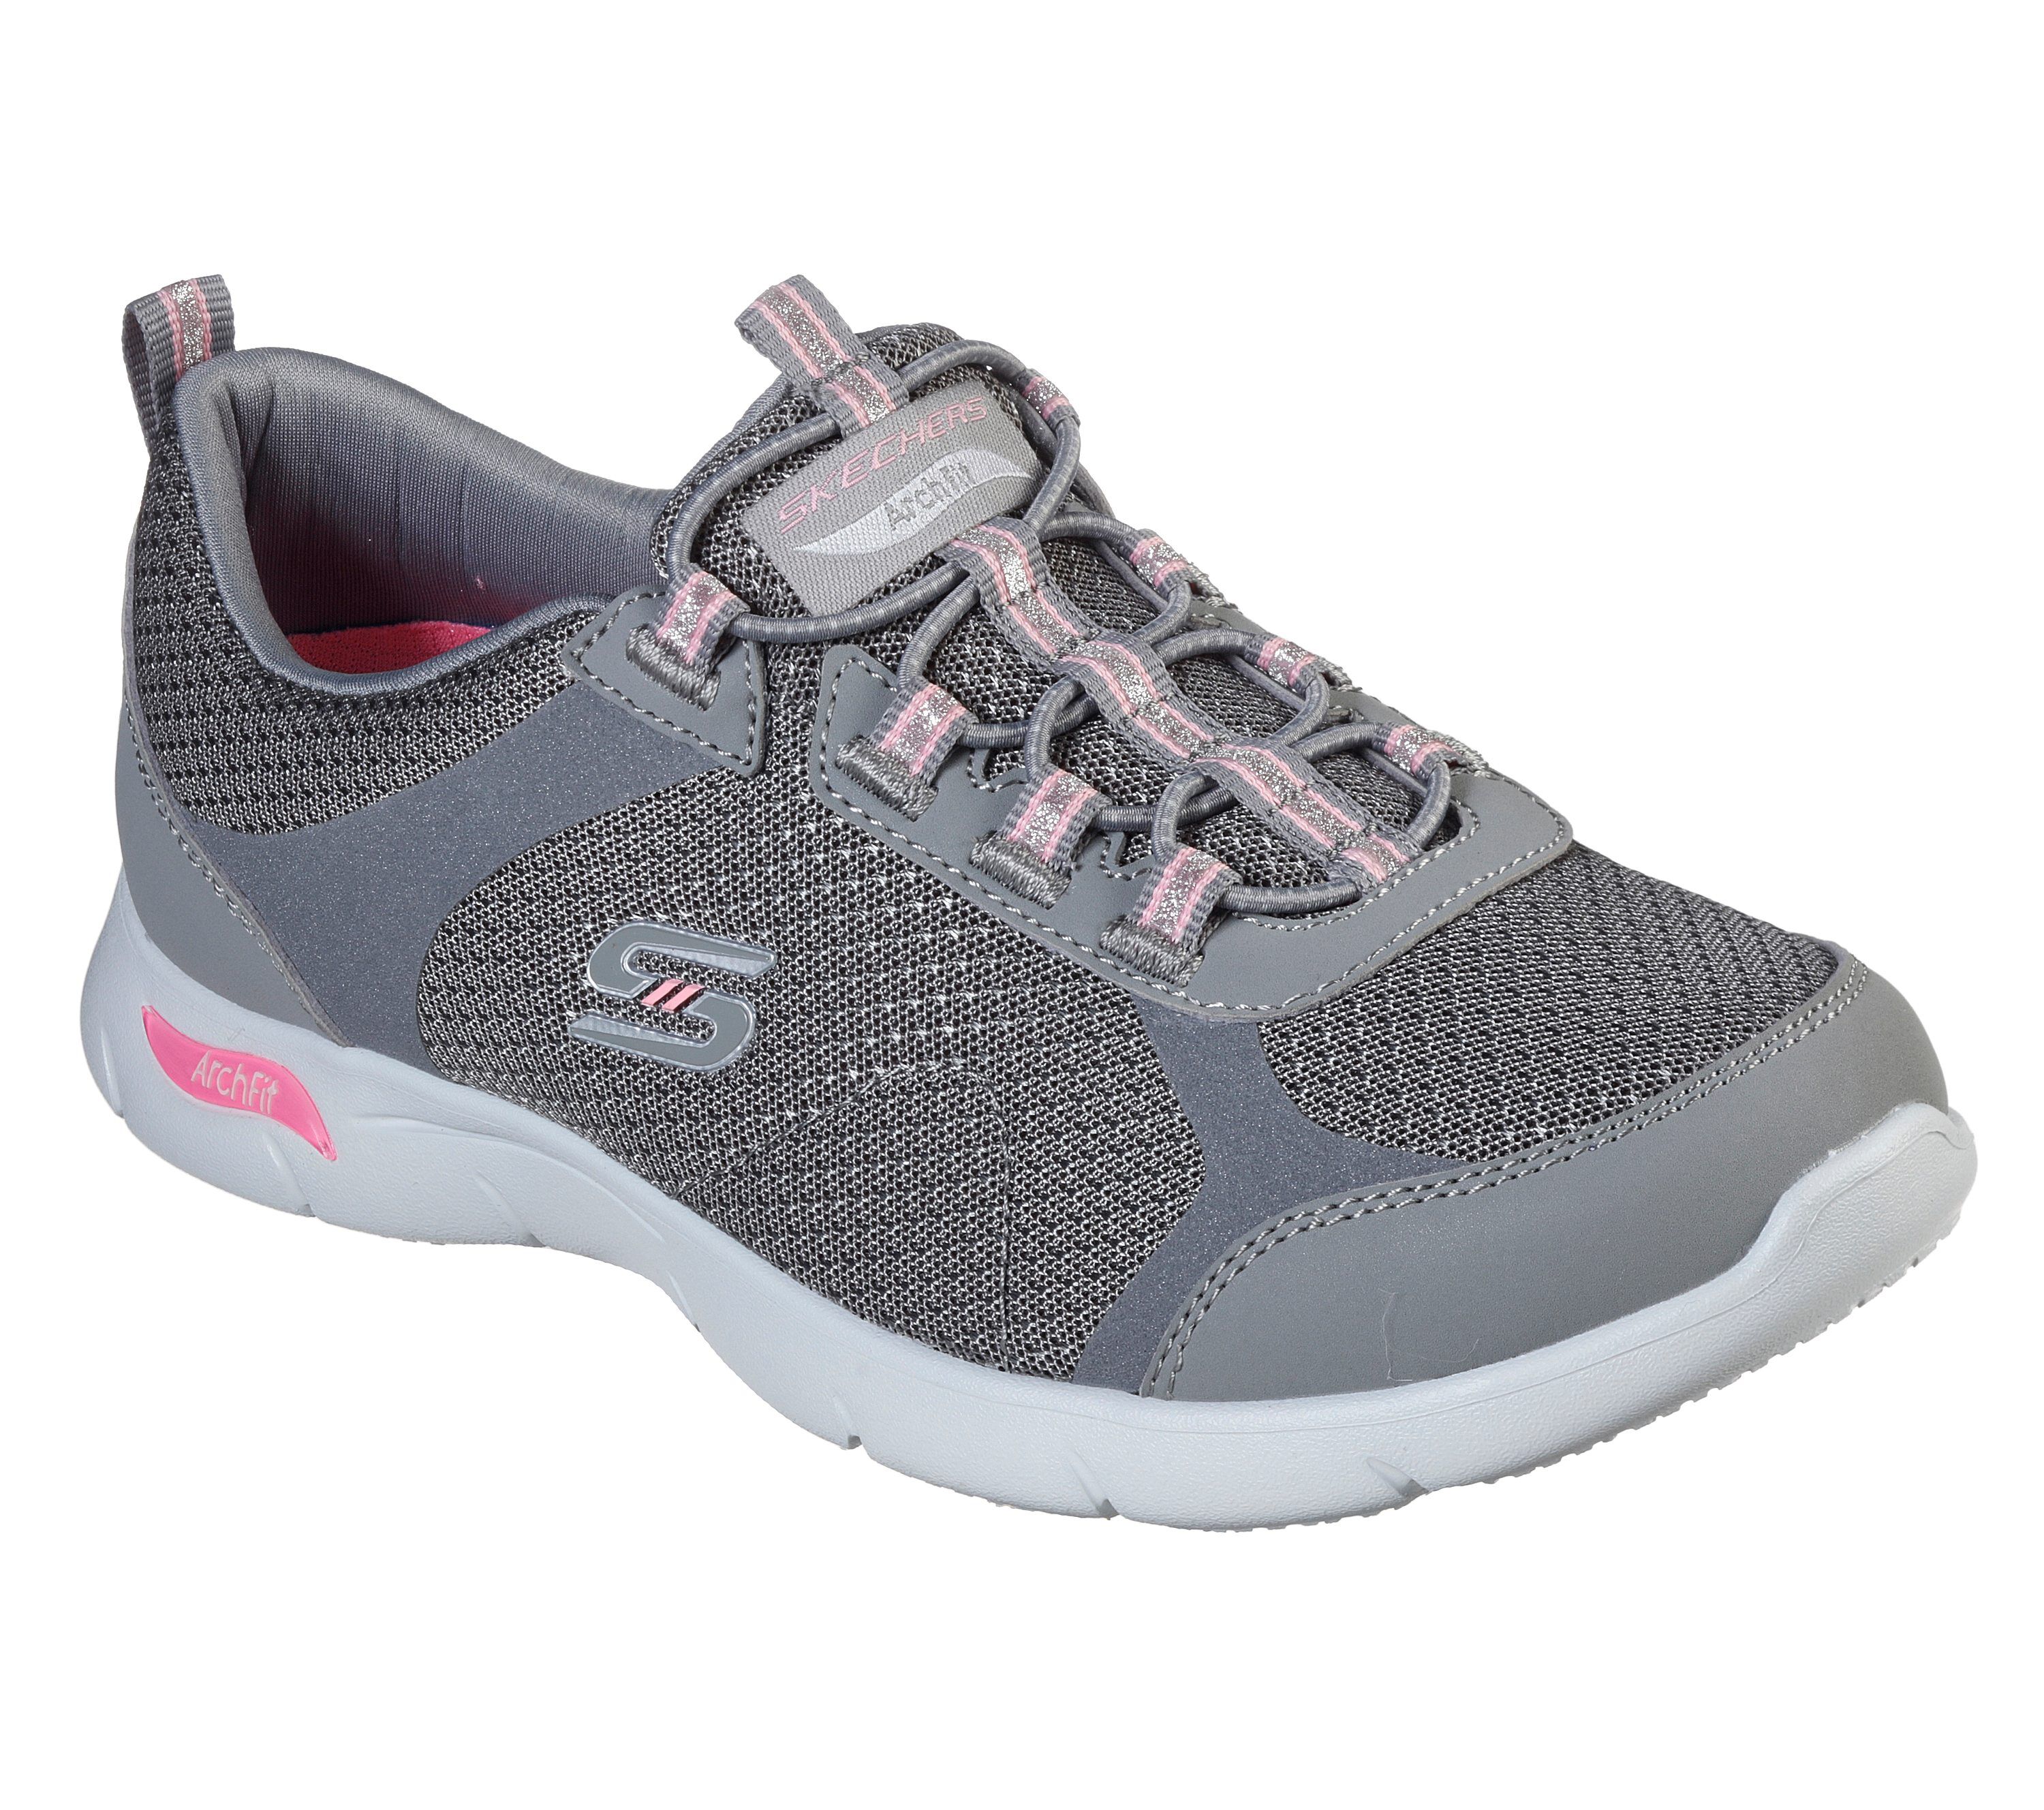 sketcher casual shoes